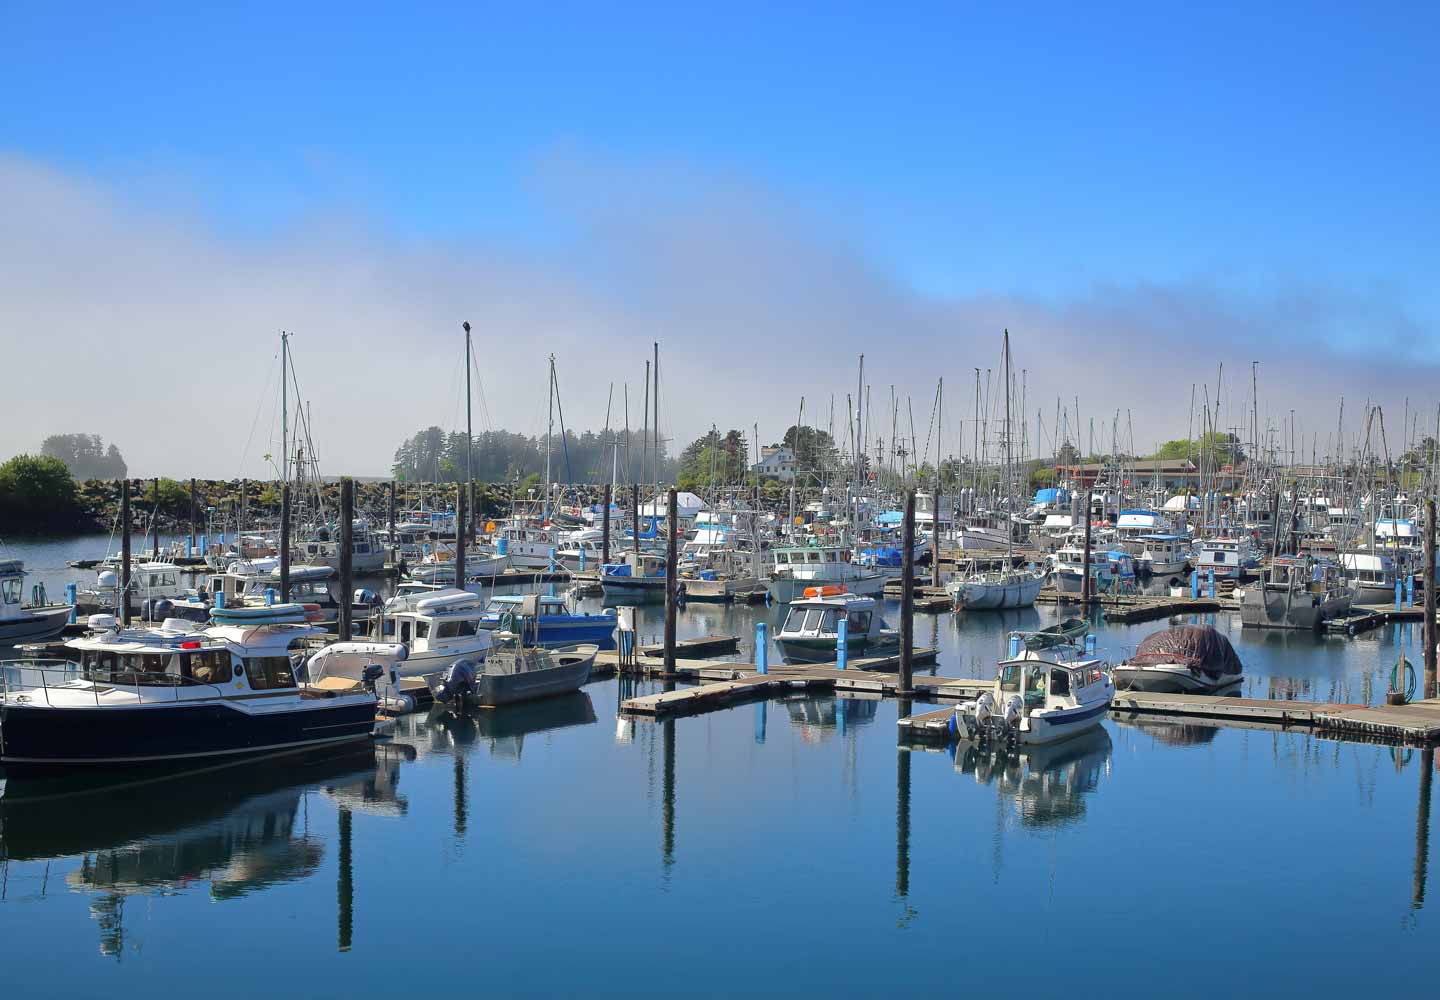 Sitka's small boat harbor is located just next to downtown. Take a look at the fishing boats and small ships, just a short walk from the shuttle stop.